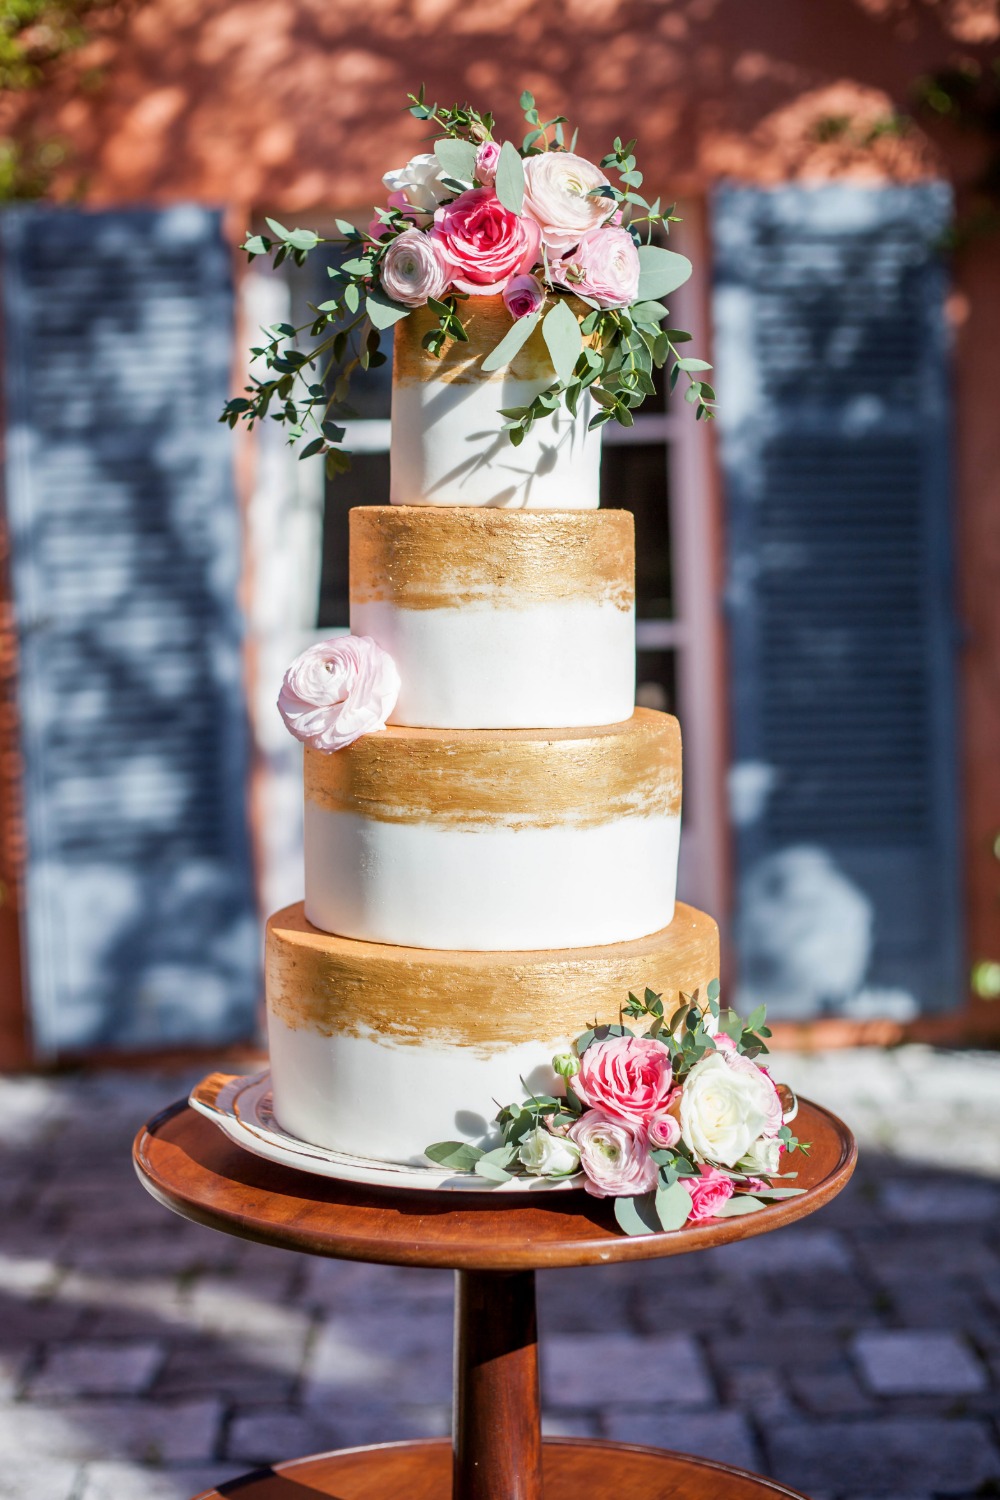 Gold and white wedding cake with pink roses